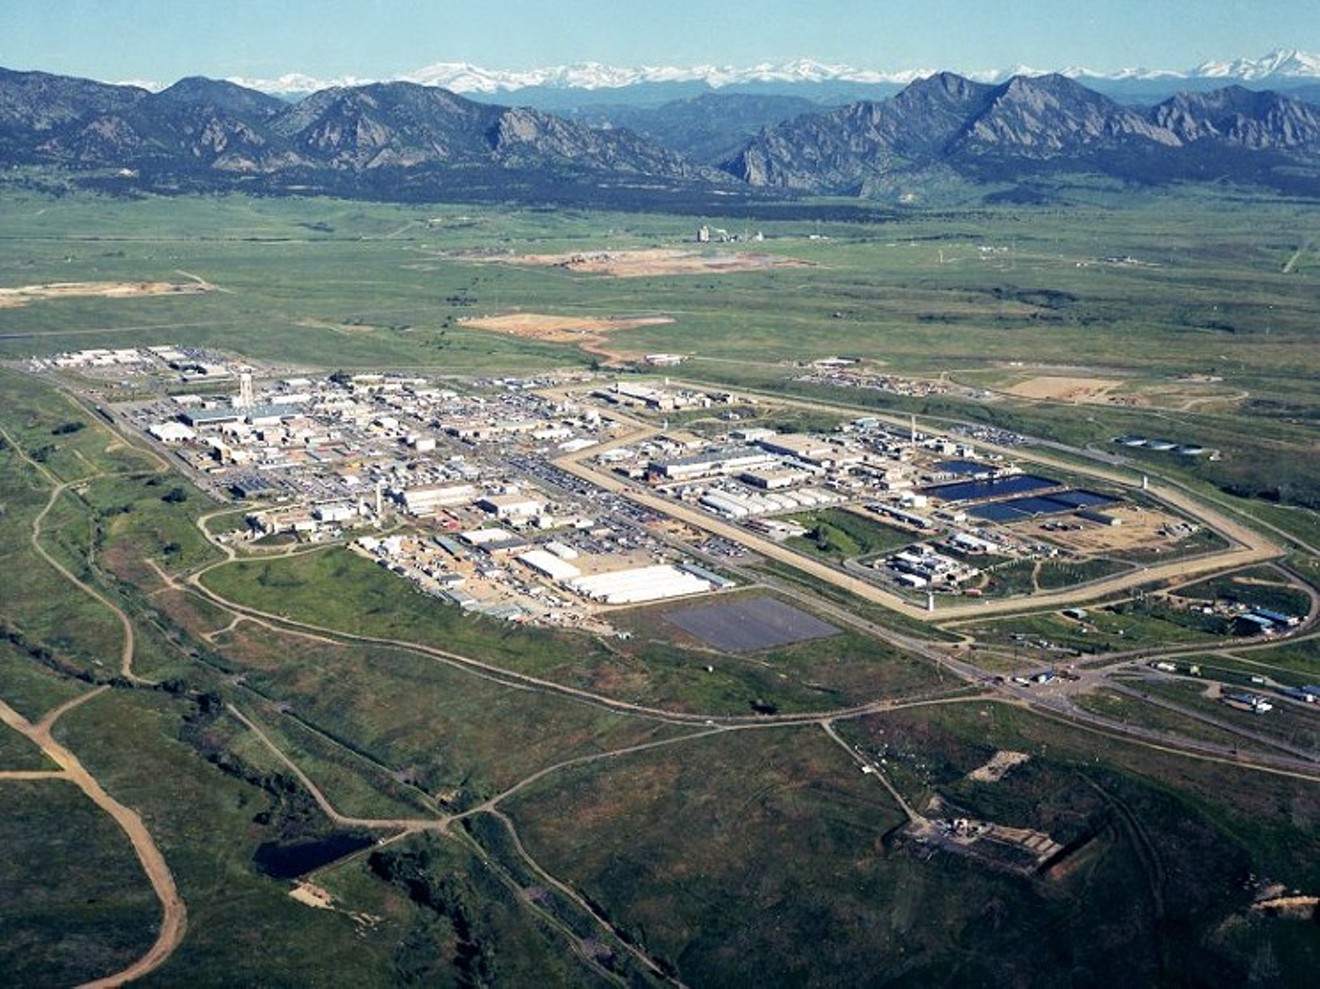 The Rocky Flats Nuclear Weapons Plant three decades ago.